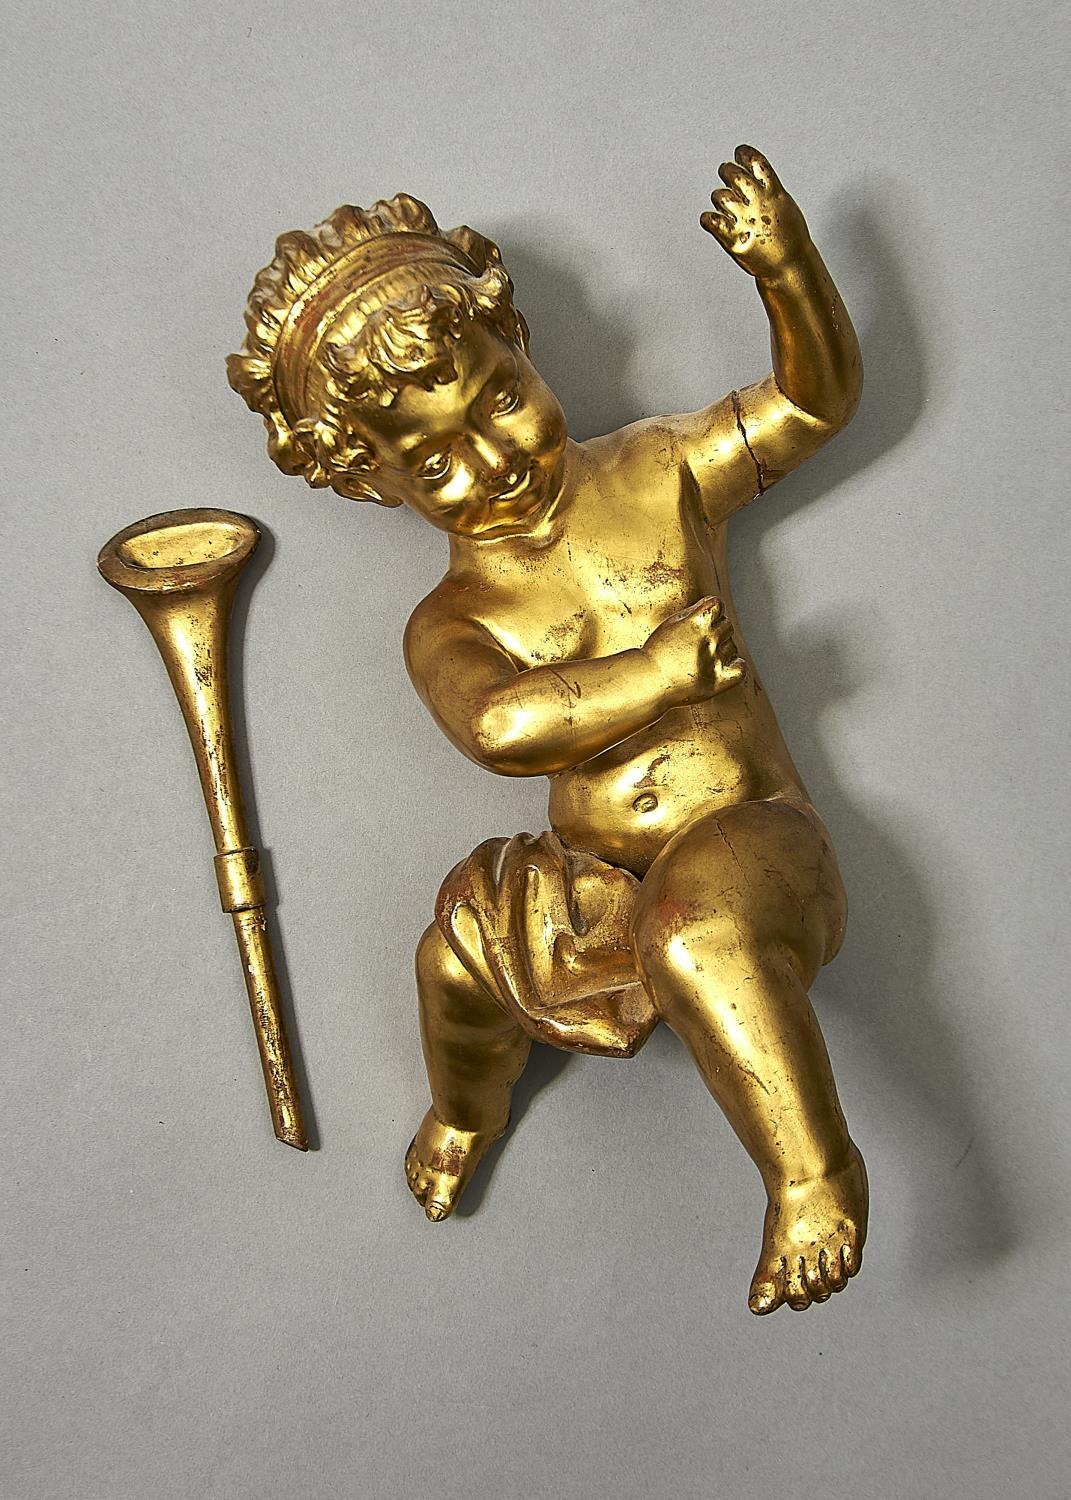 A GILTWOOD FIGURE OF A CHILD, 19TH/20TH C, HOLDING A TRUMPET, 39CM H Condition reportTrumpet - Image 2 of 2